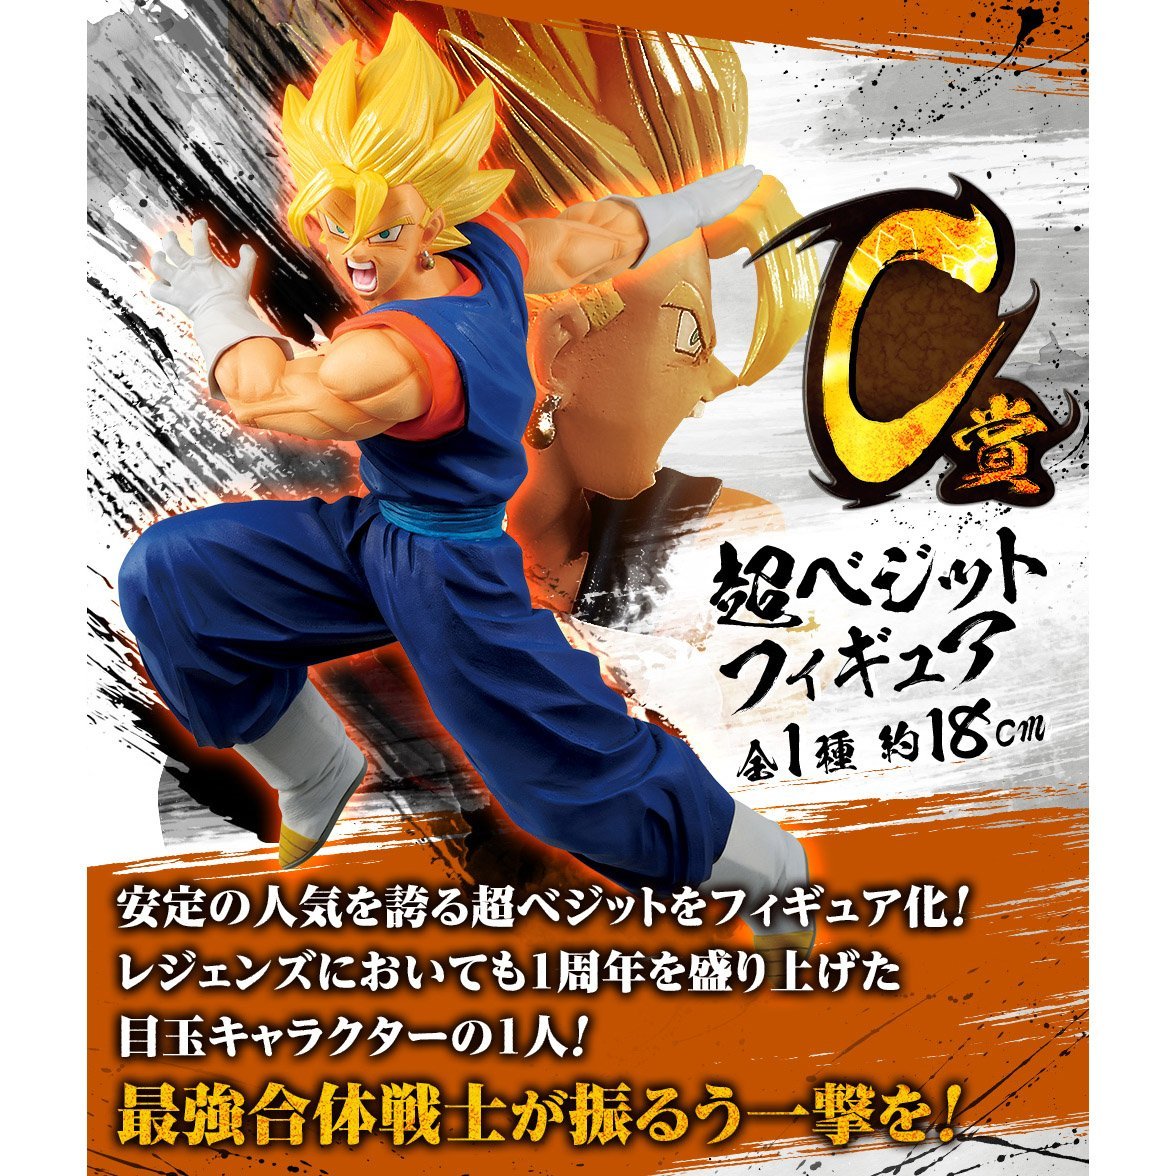 Ichiban Kuji Dragon Ball Rising Fighters with Dragon Ball Legends-Bandai-Ace Cards &amp; Collectibles